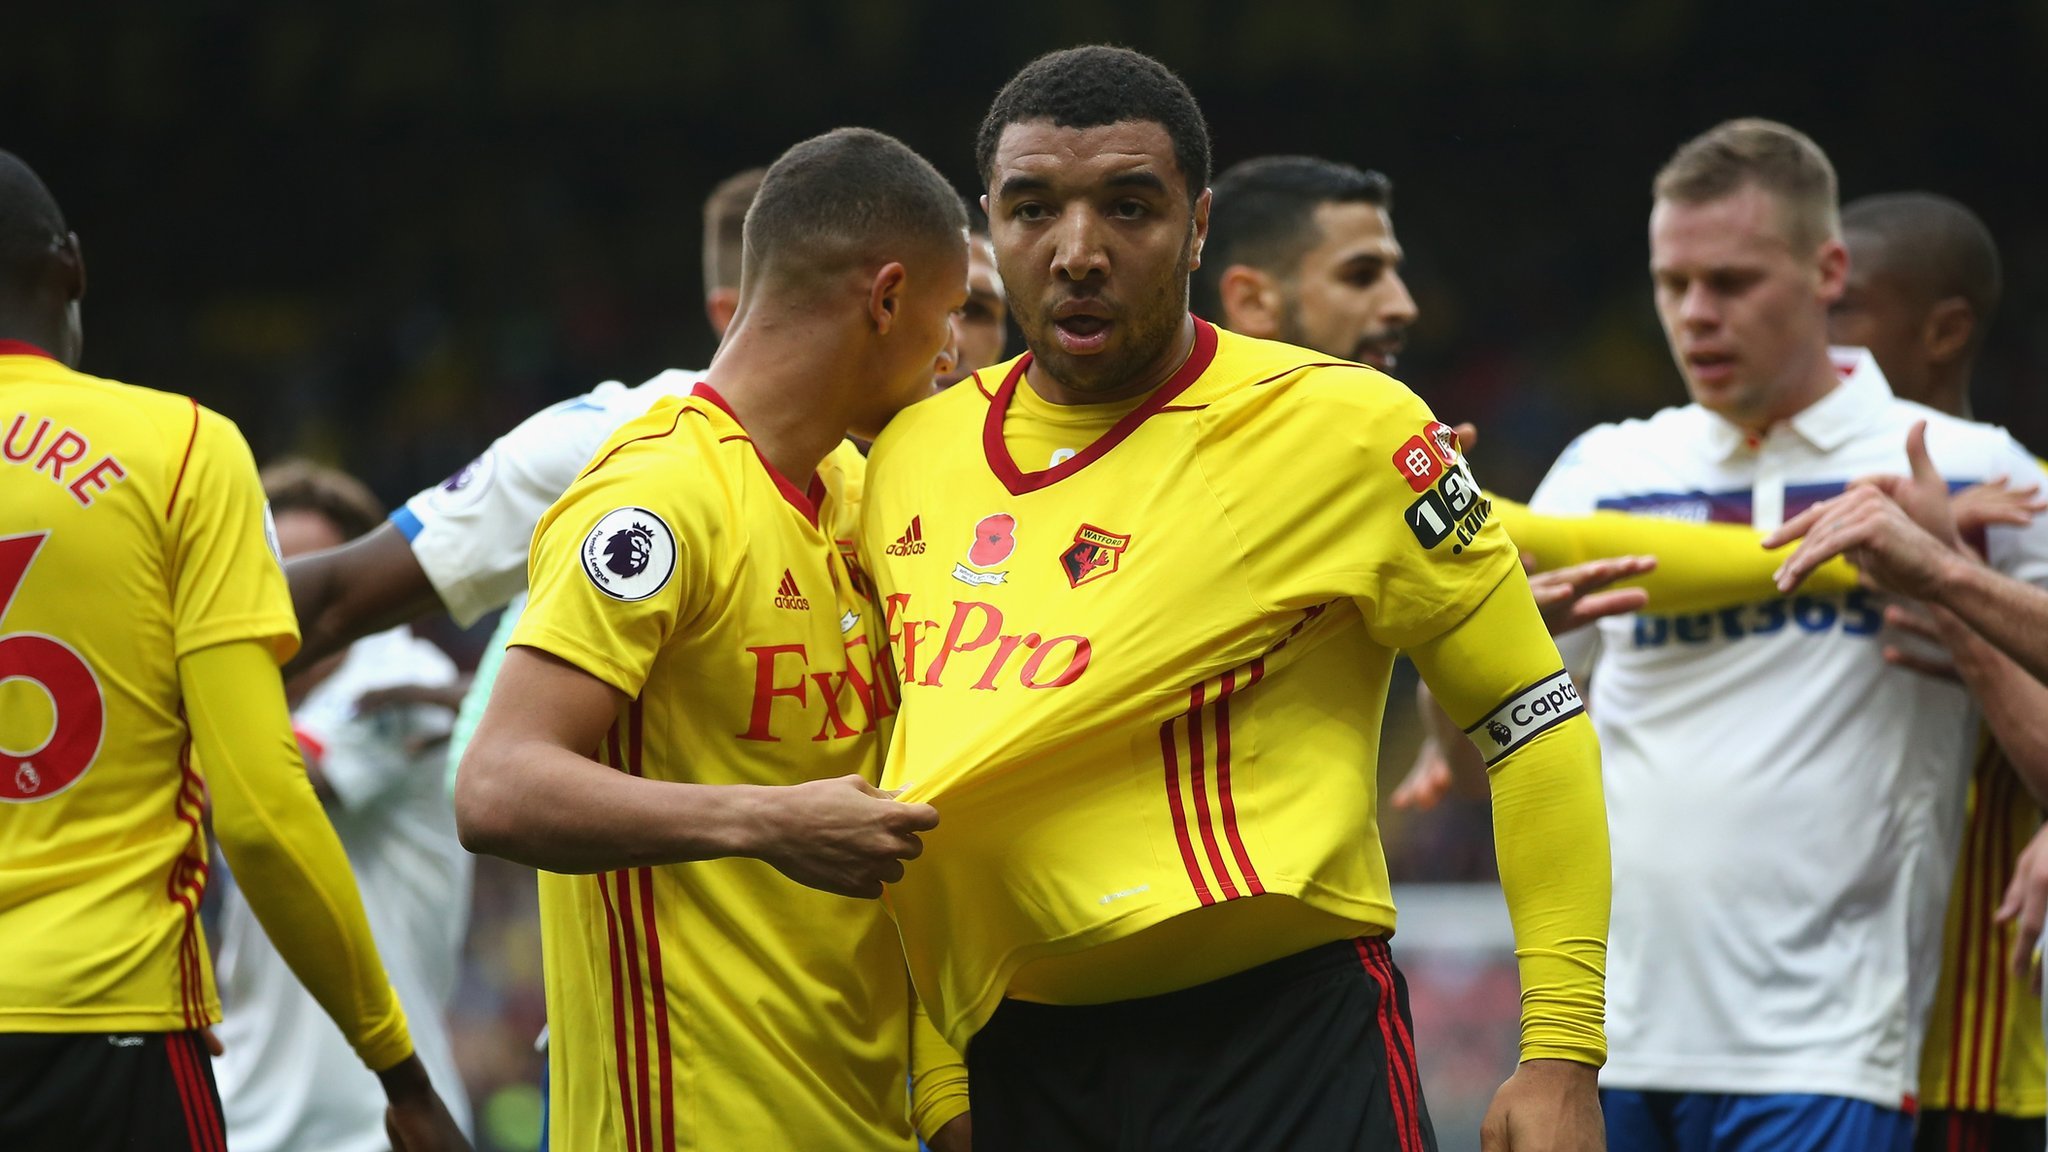 Watford captain Deeney charged with violent conduct